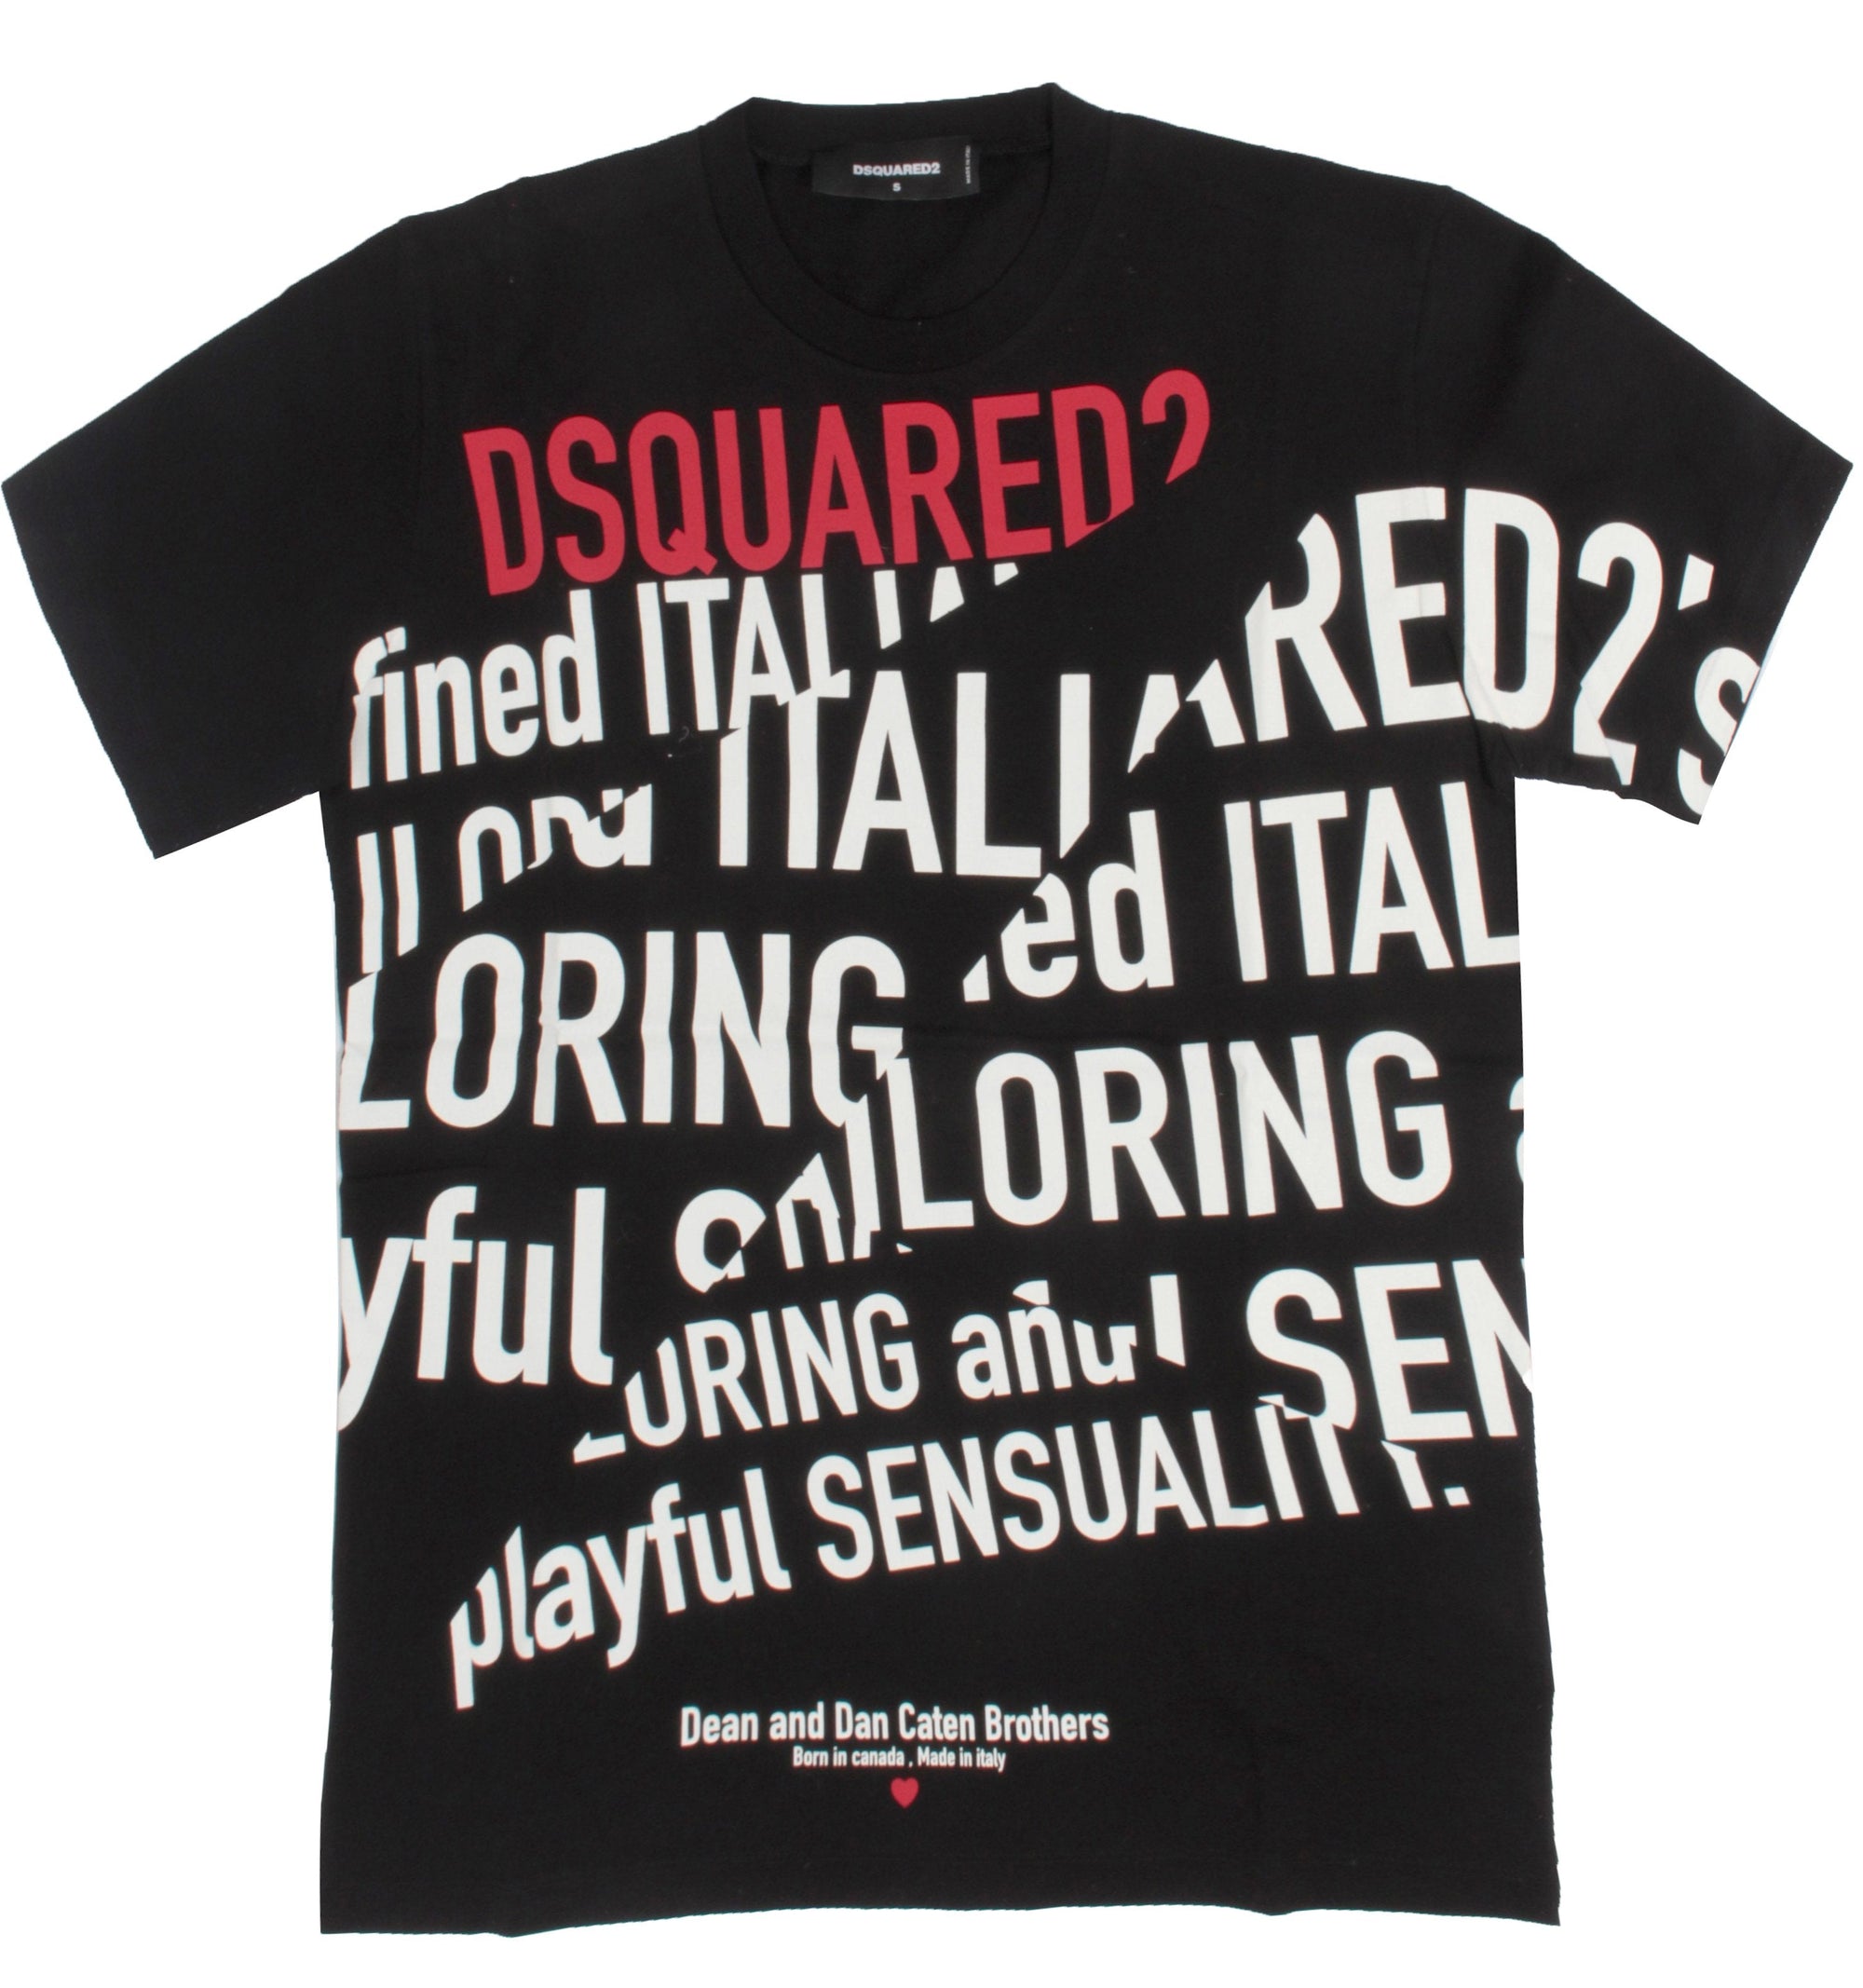 Dsquared2 Graphic Tee - Black & Red